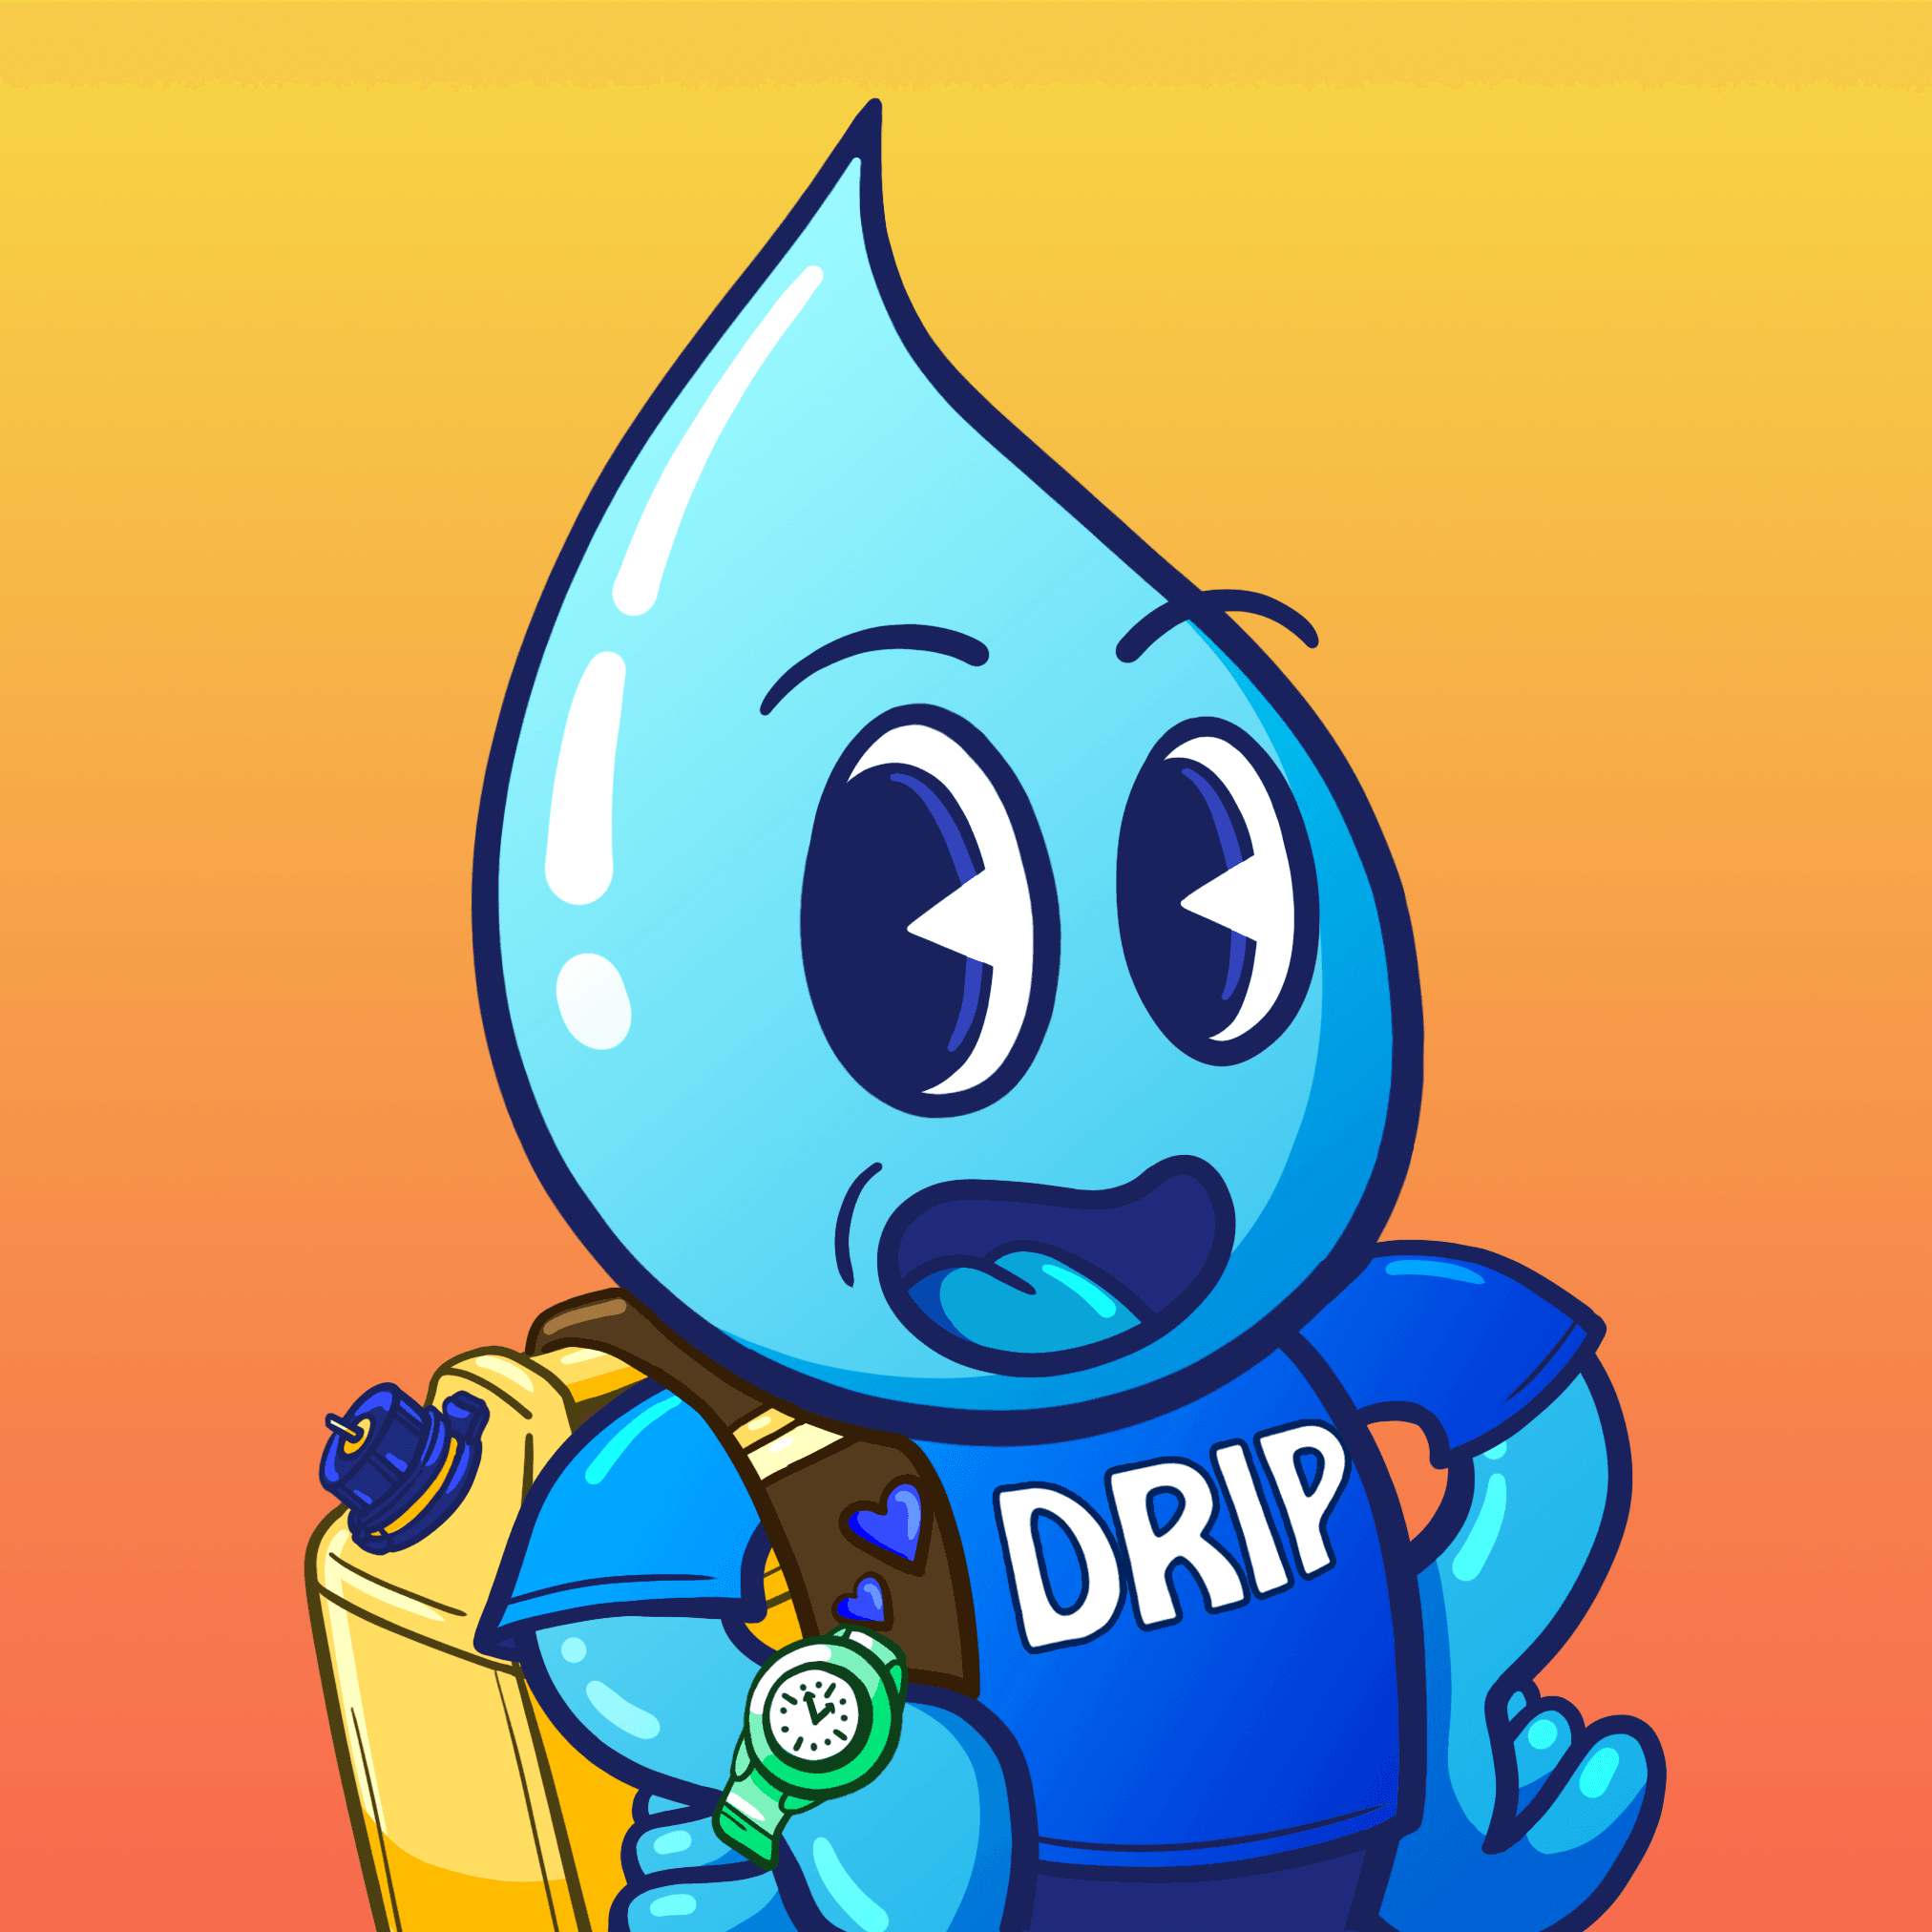 Drip For Good